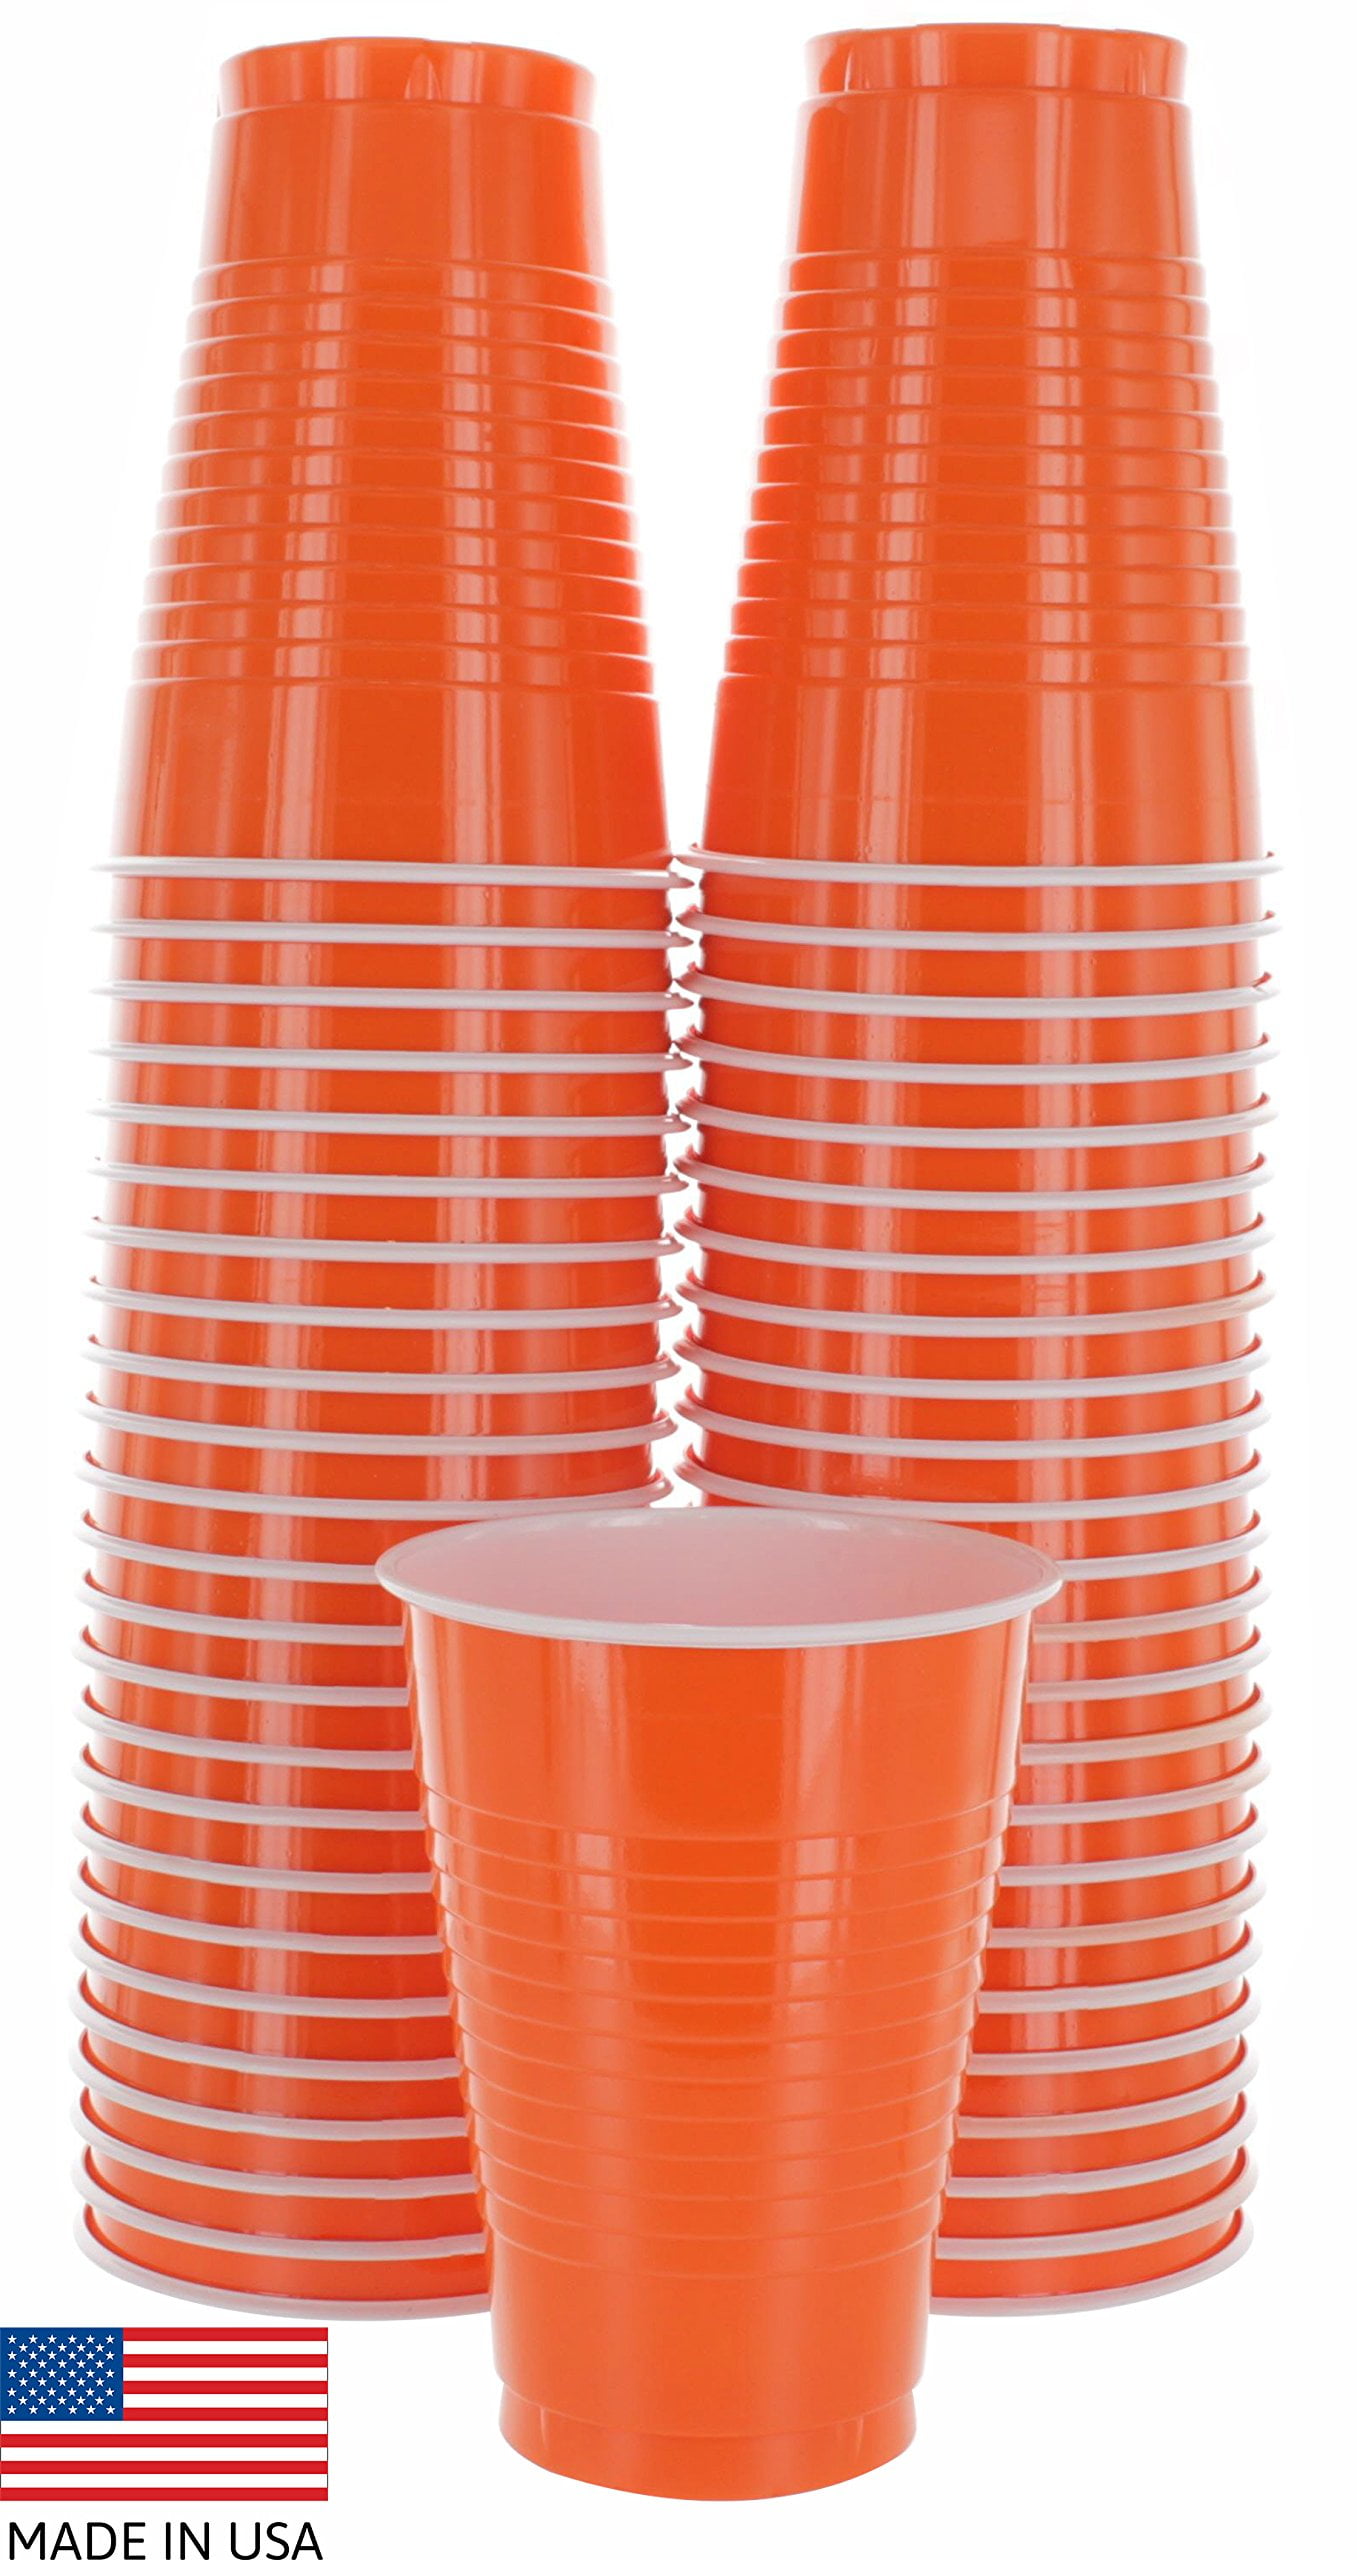 Disposable Plastic Cups, Red Colored Plastic Cups, 12-Ounce Plastic Party  Cups, Strong and Sturdy Disposable Cups for Party, Wedding, Christmas,  Halloween Party Cup, 50 Pack - By Amcrate 